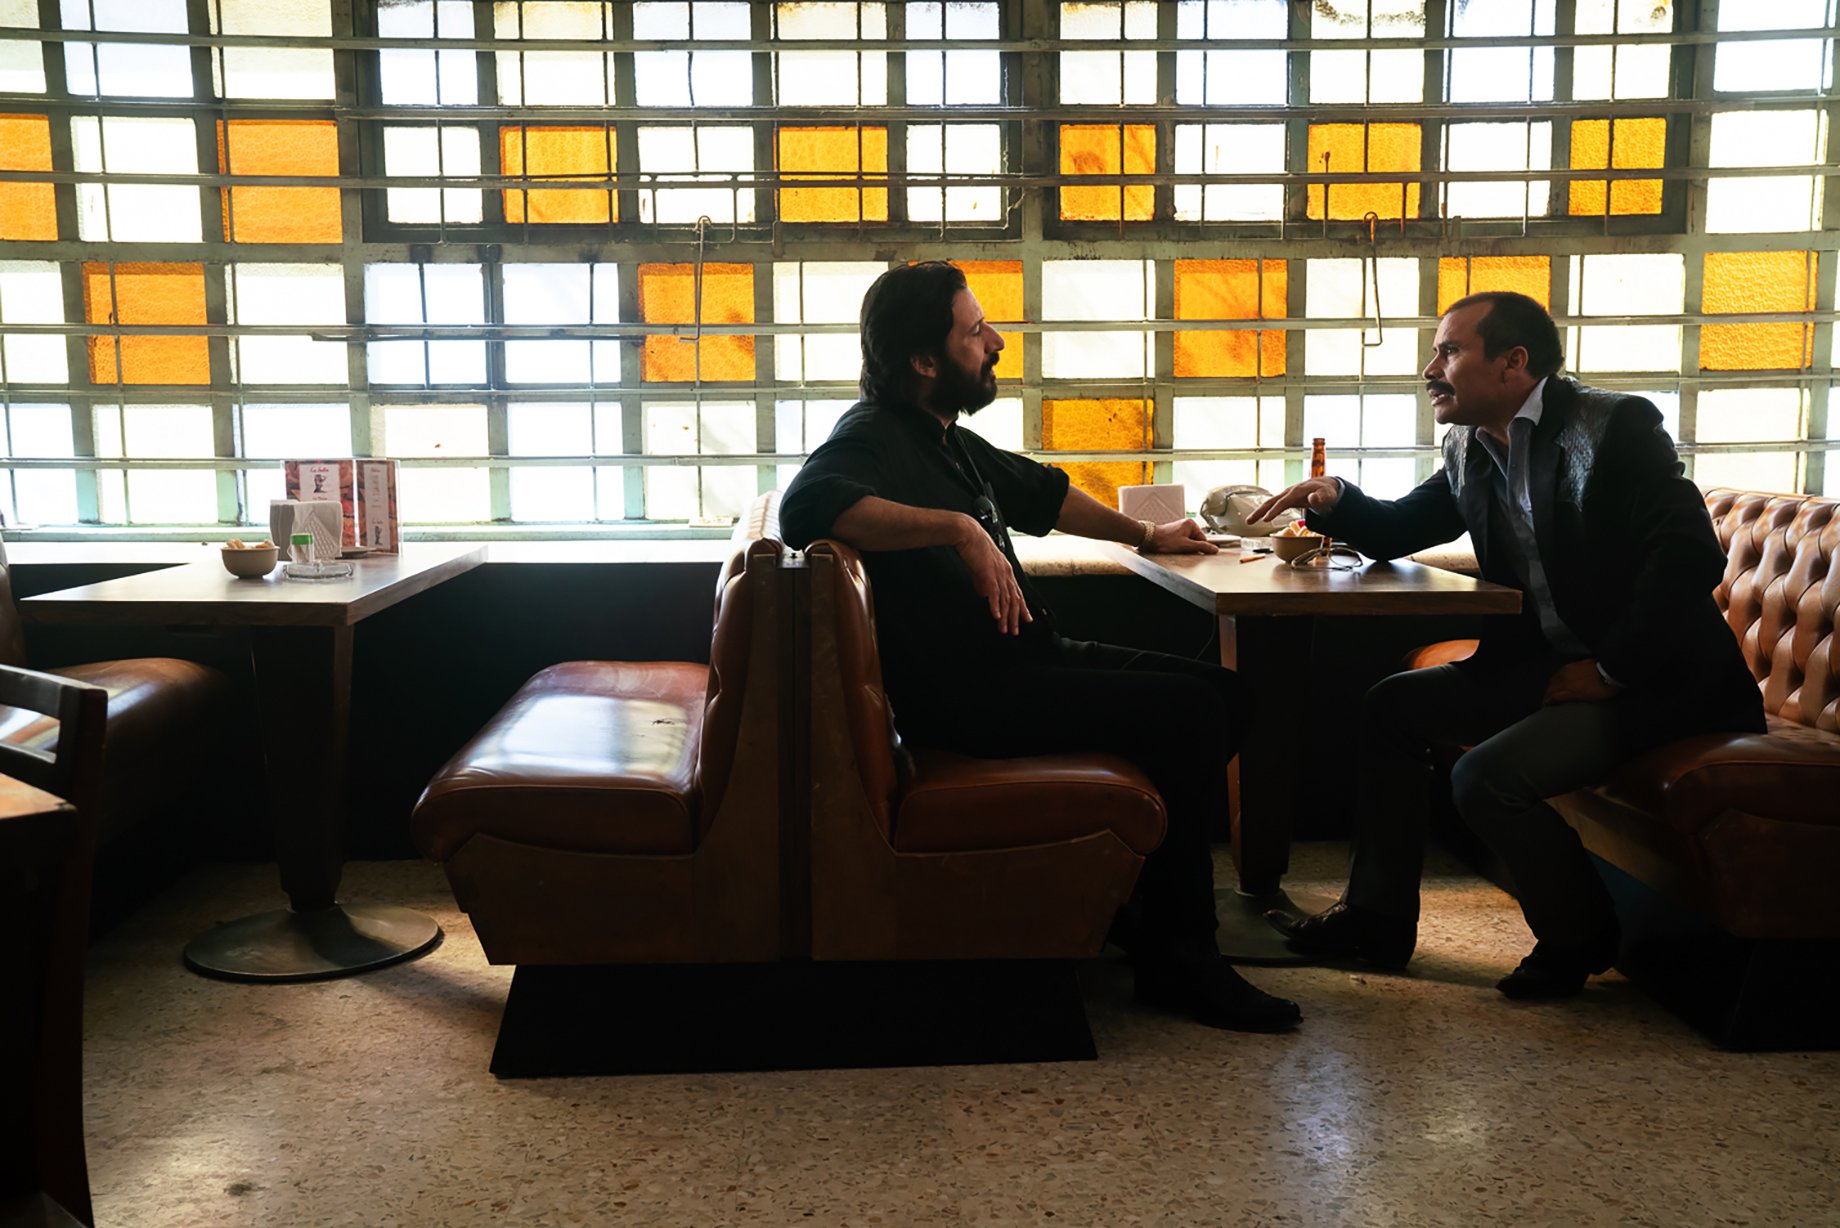 Two men talking at a restaurant for Narcos: Mexico season 3 shot by Nicole Franco for Netflix